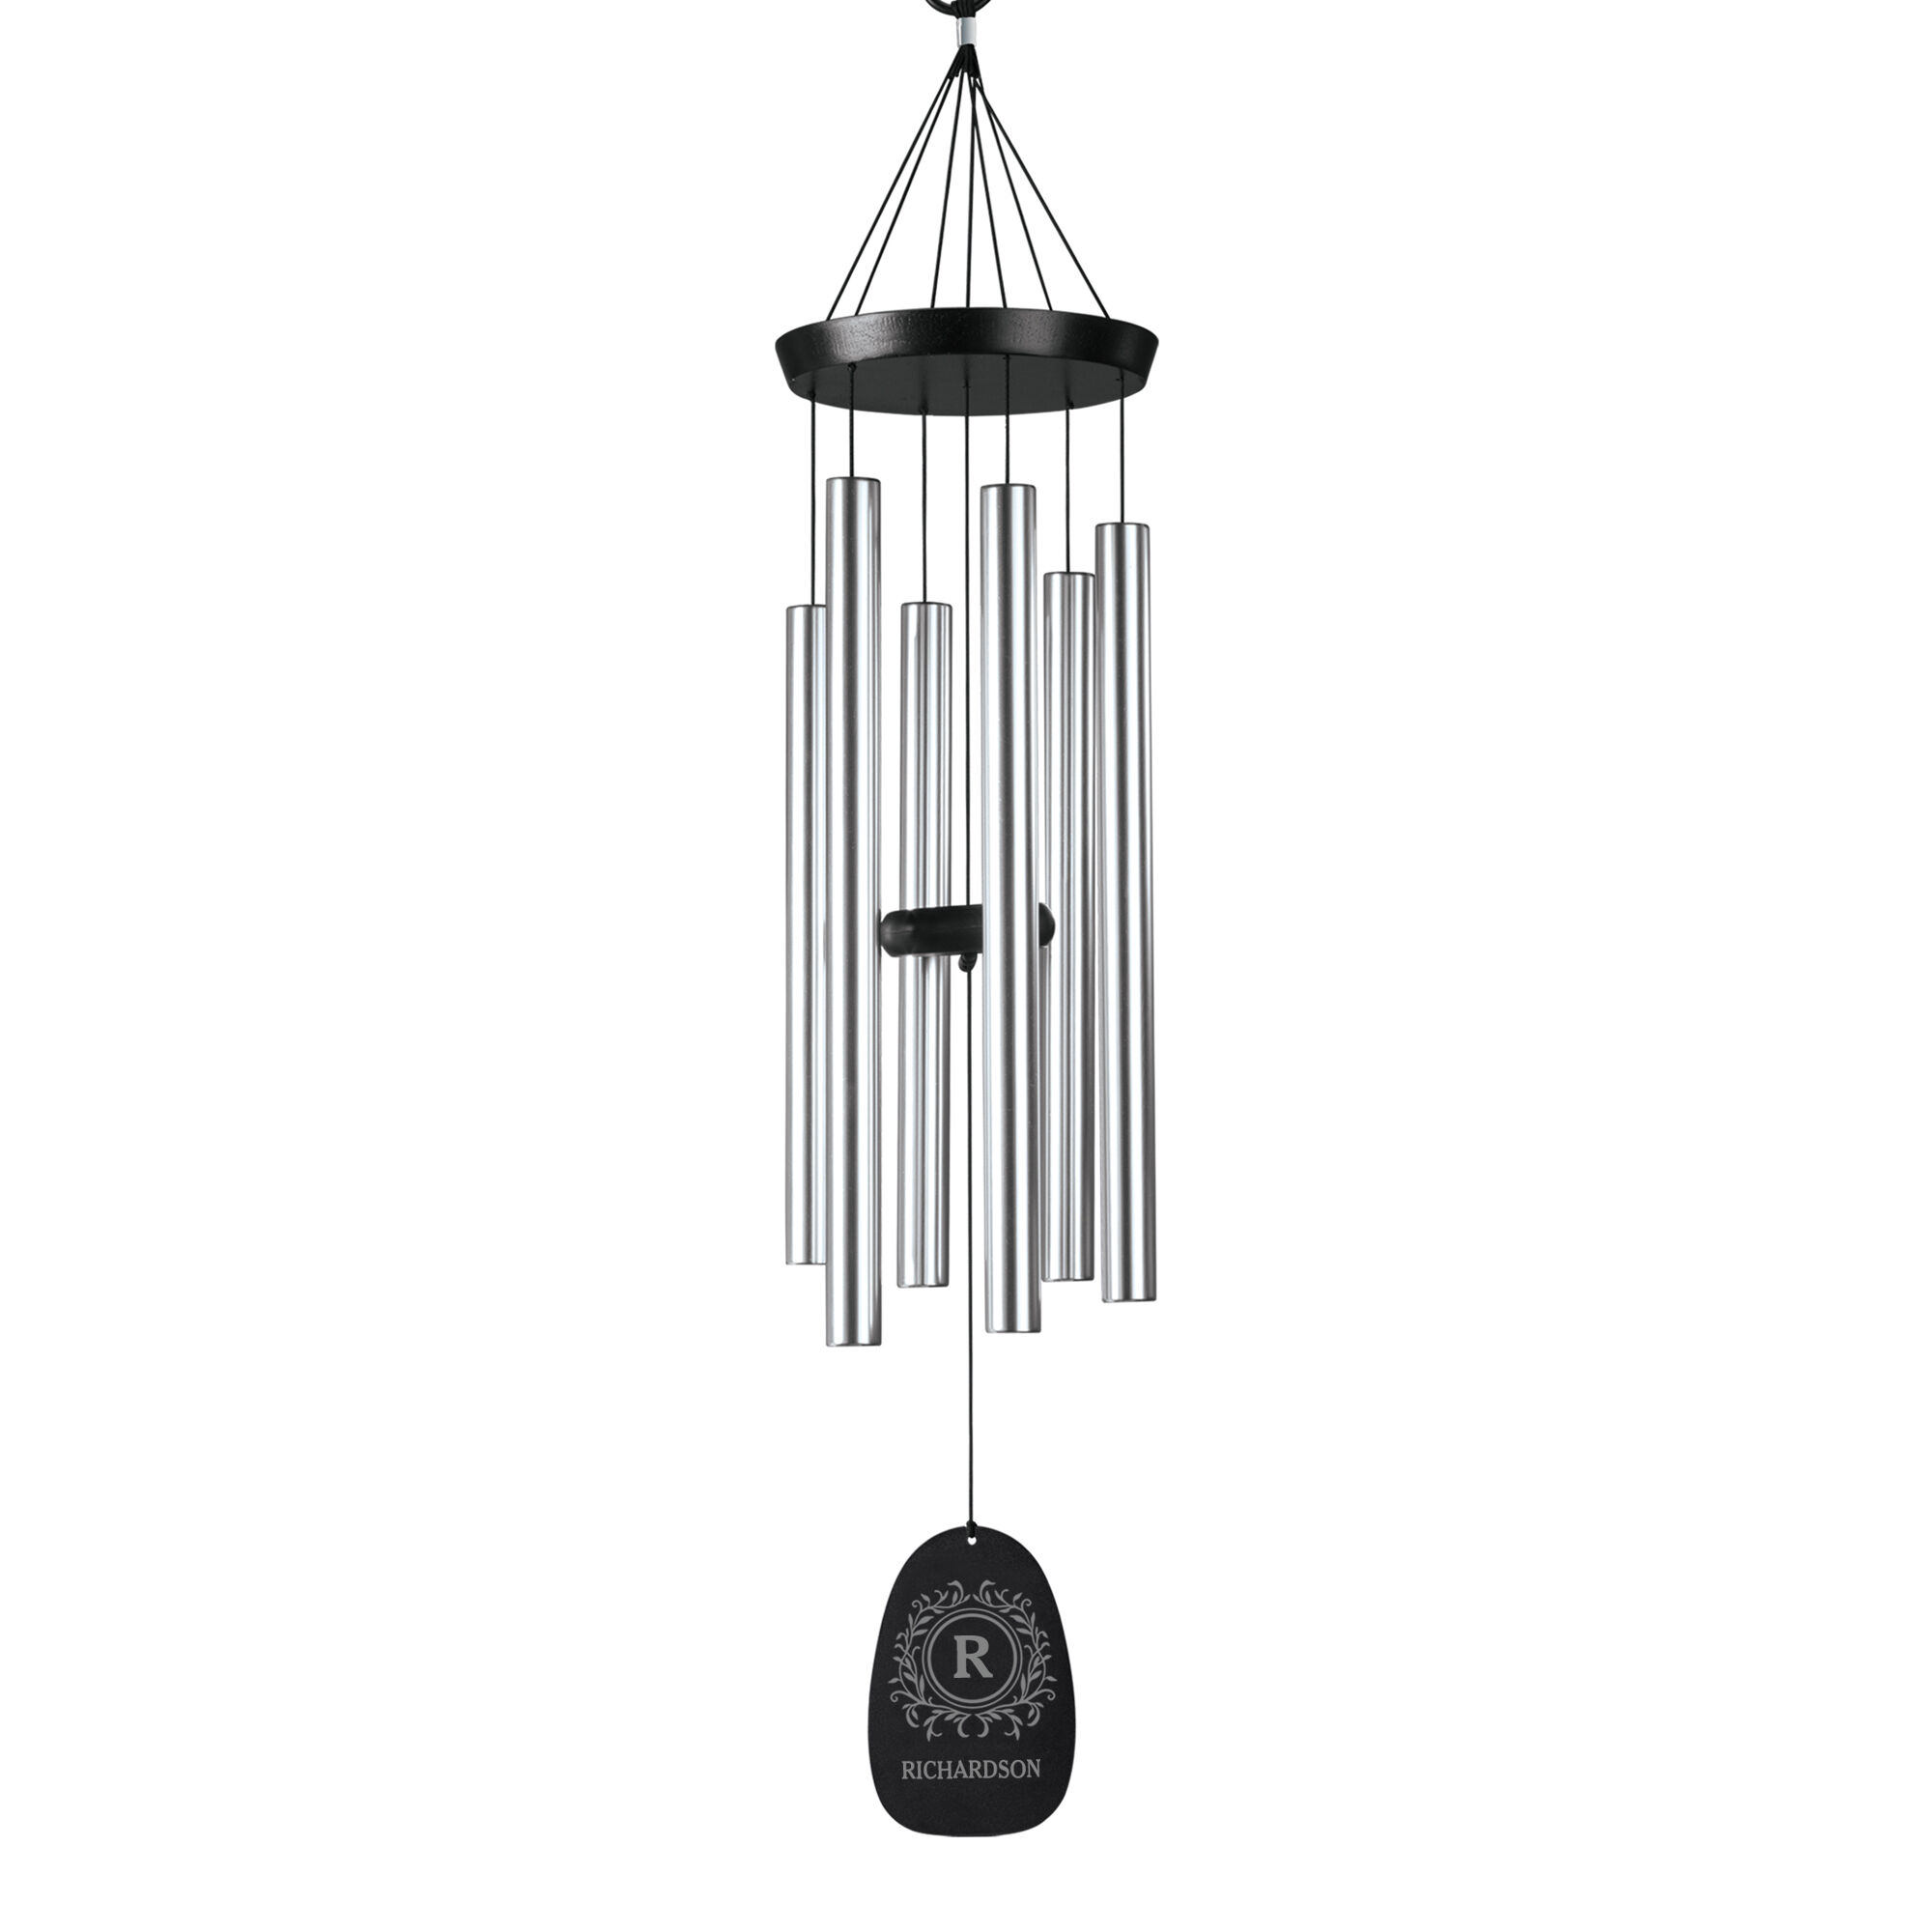 The Personalized Wind Chime 10245 0012 a main